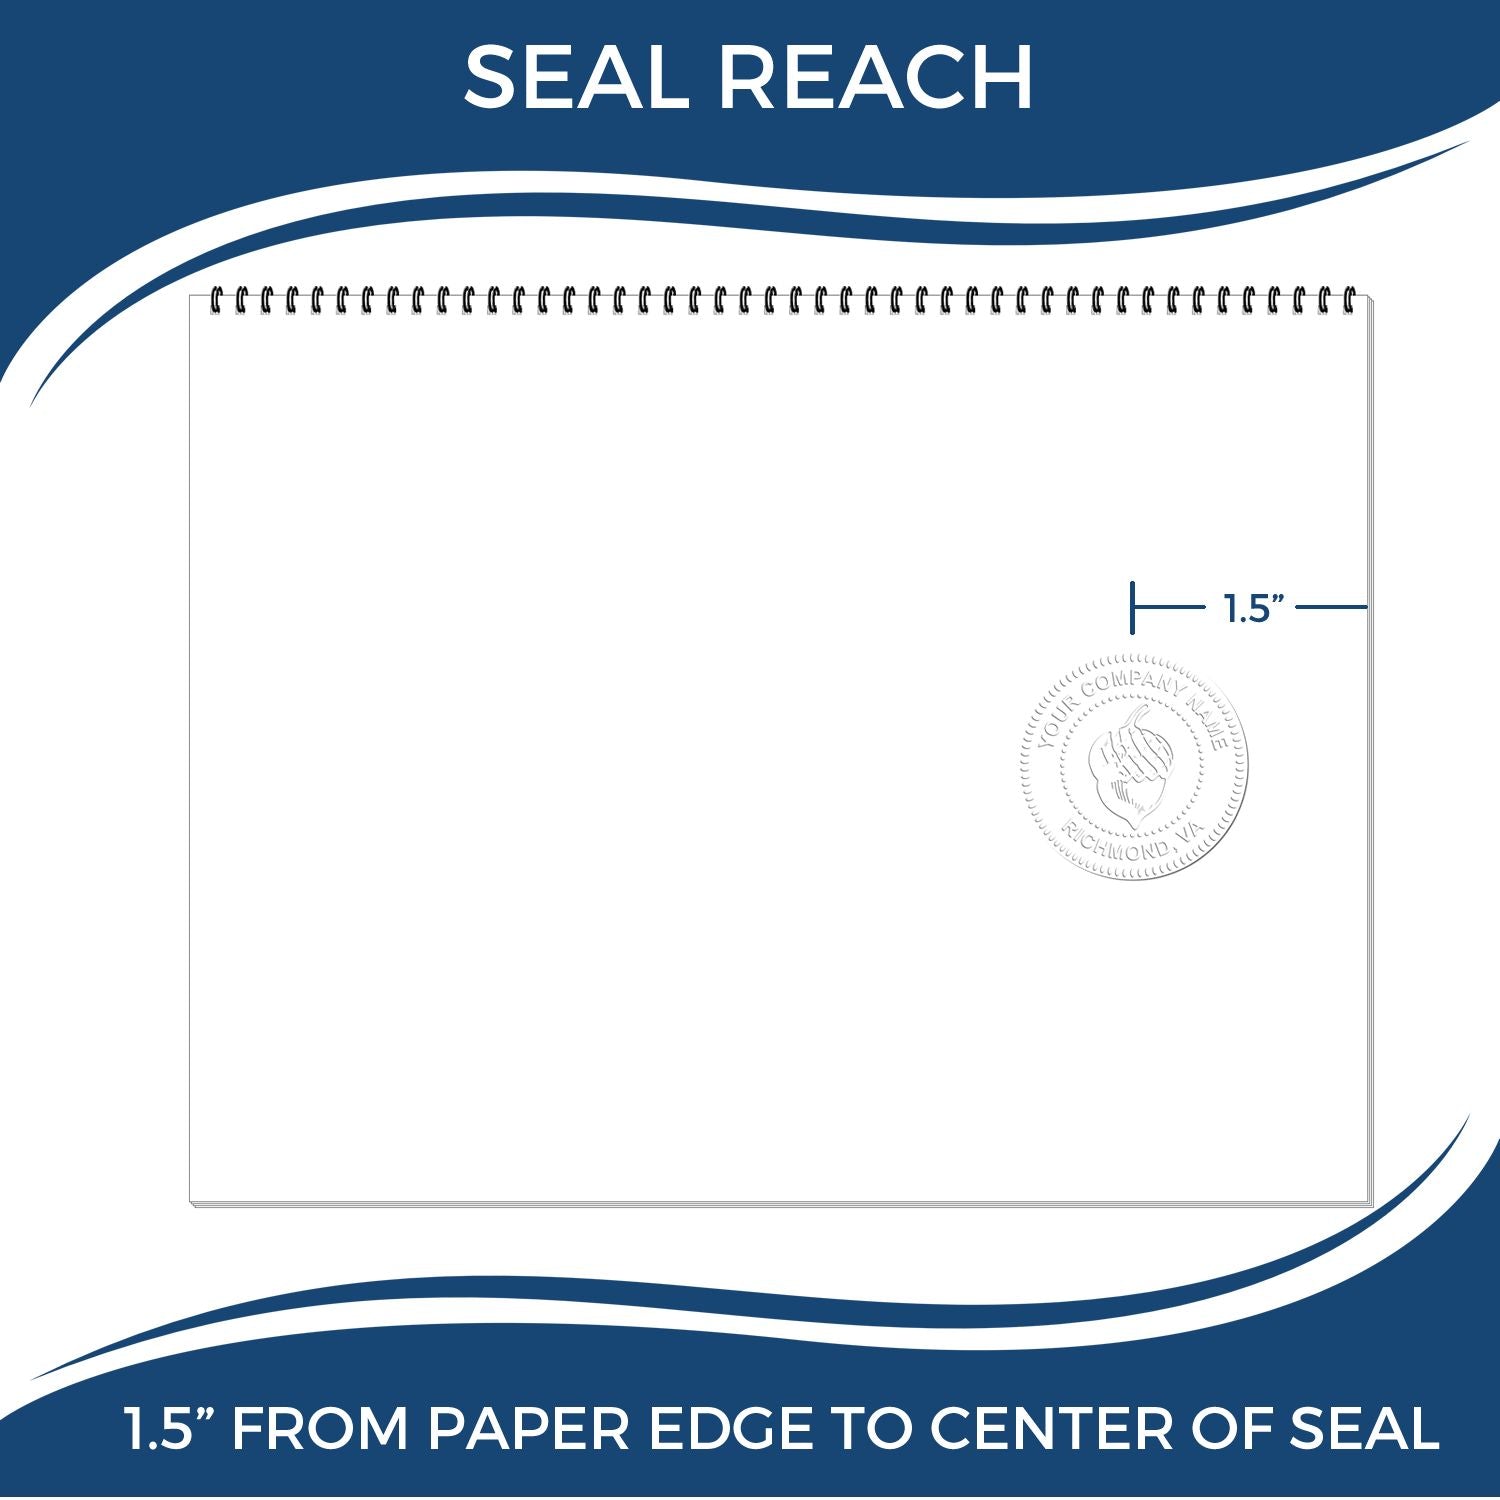 An infographic showing the seal reach which is represented by a ruler and a miniature seal image of the Arkansas Desk Architect Embossing Seal